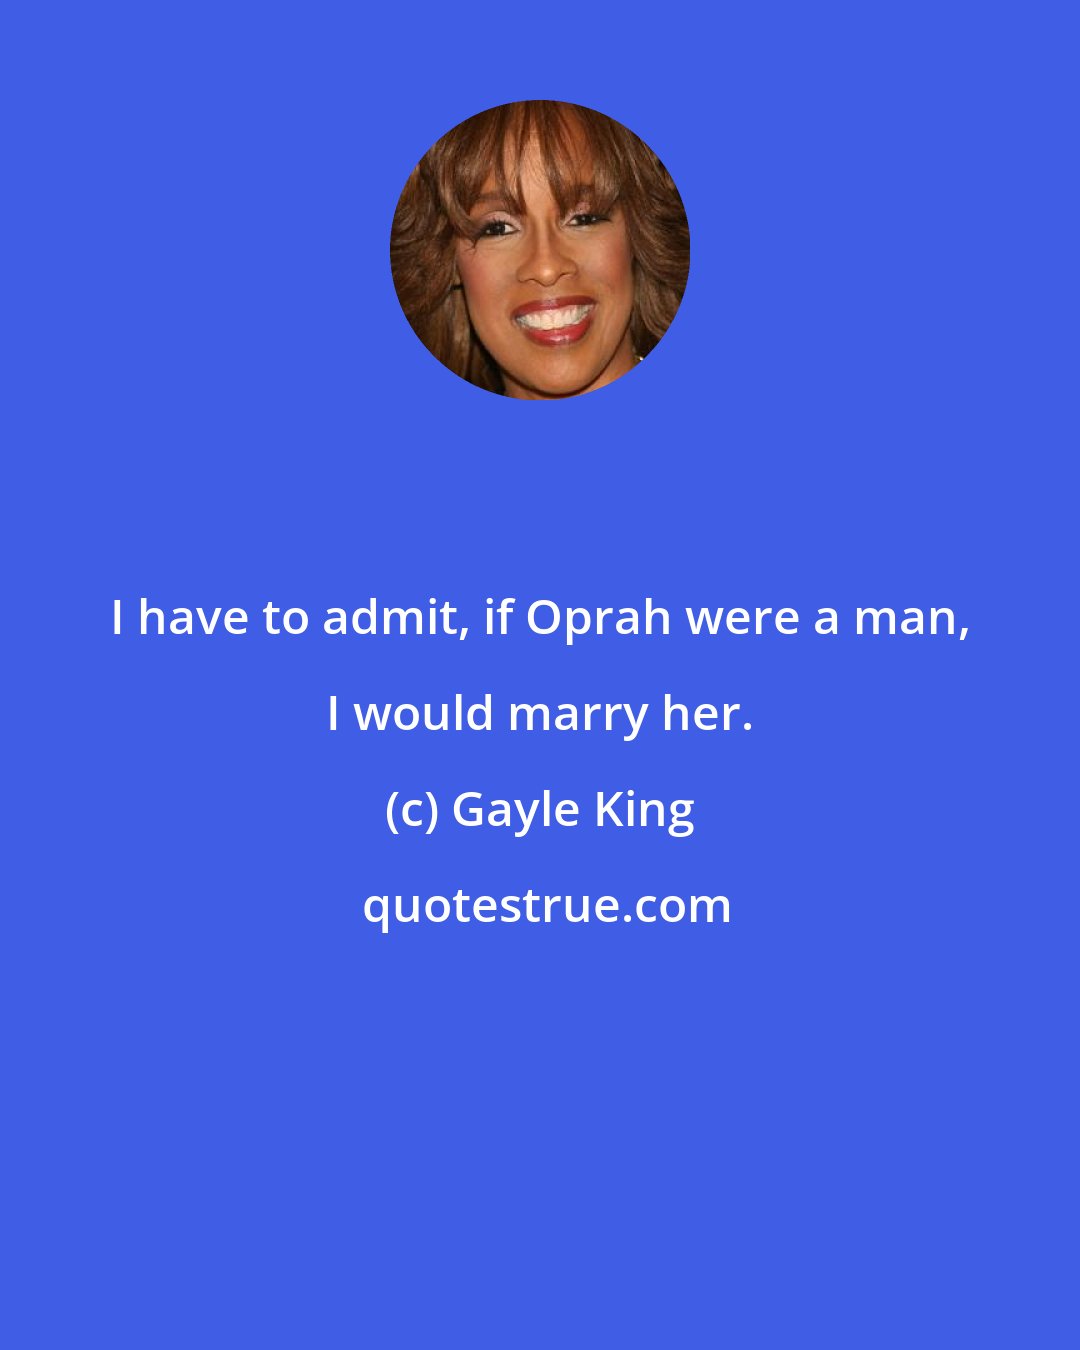 Gayle King: I have to admit, if Oprah were a man, I would marry her.